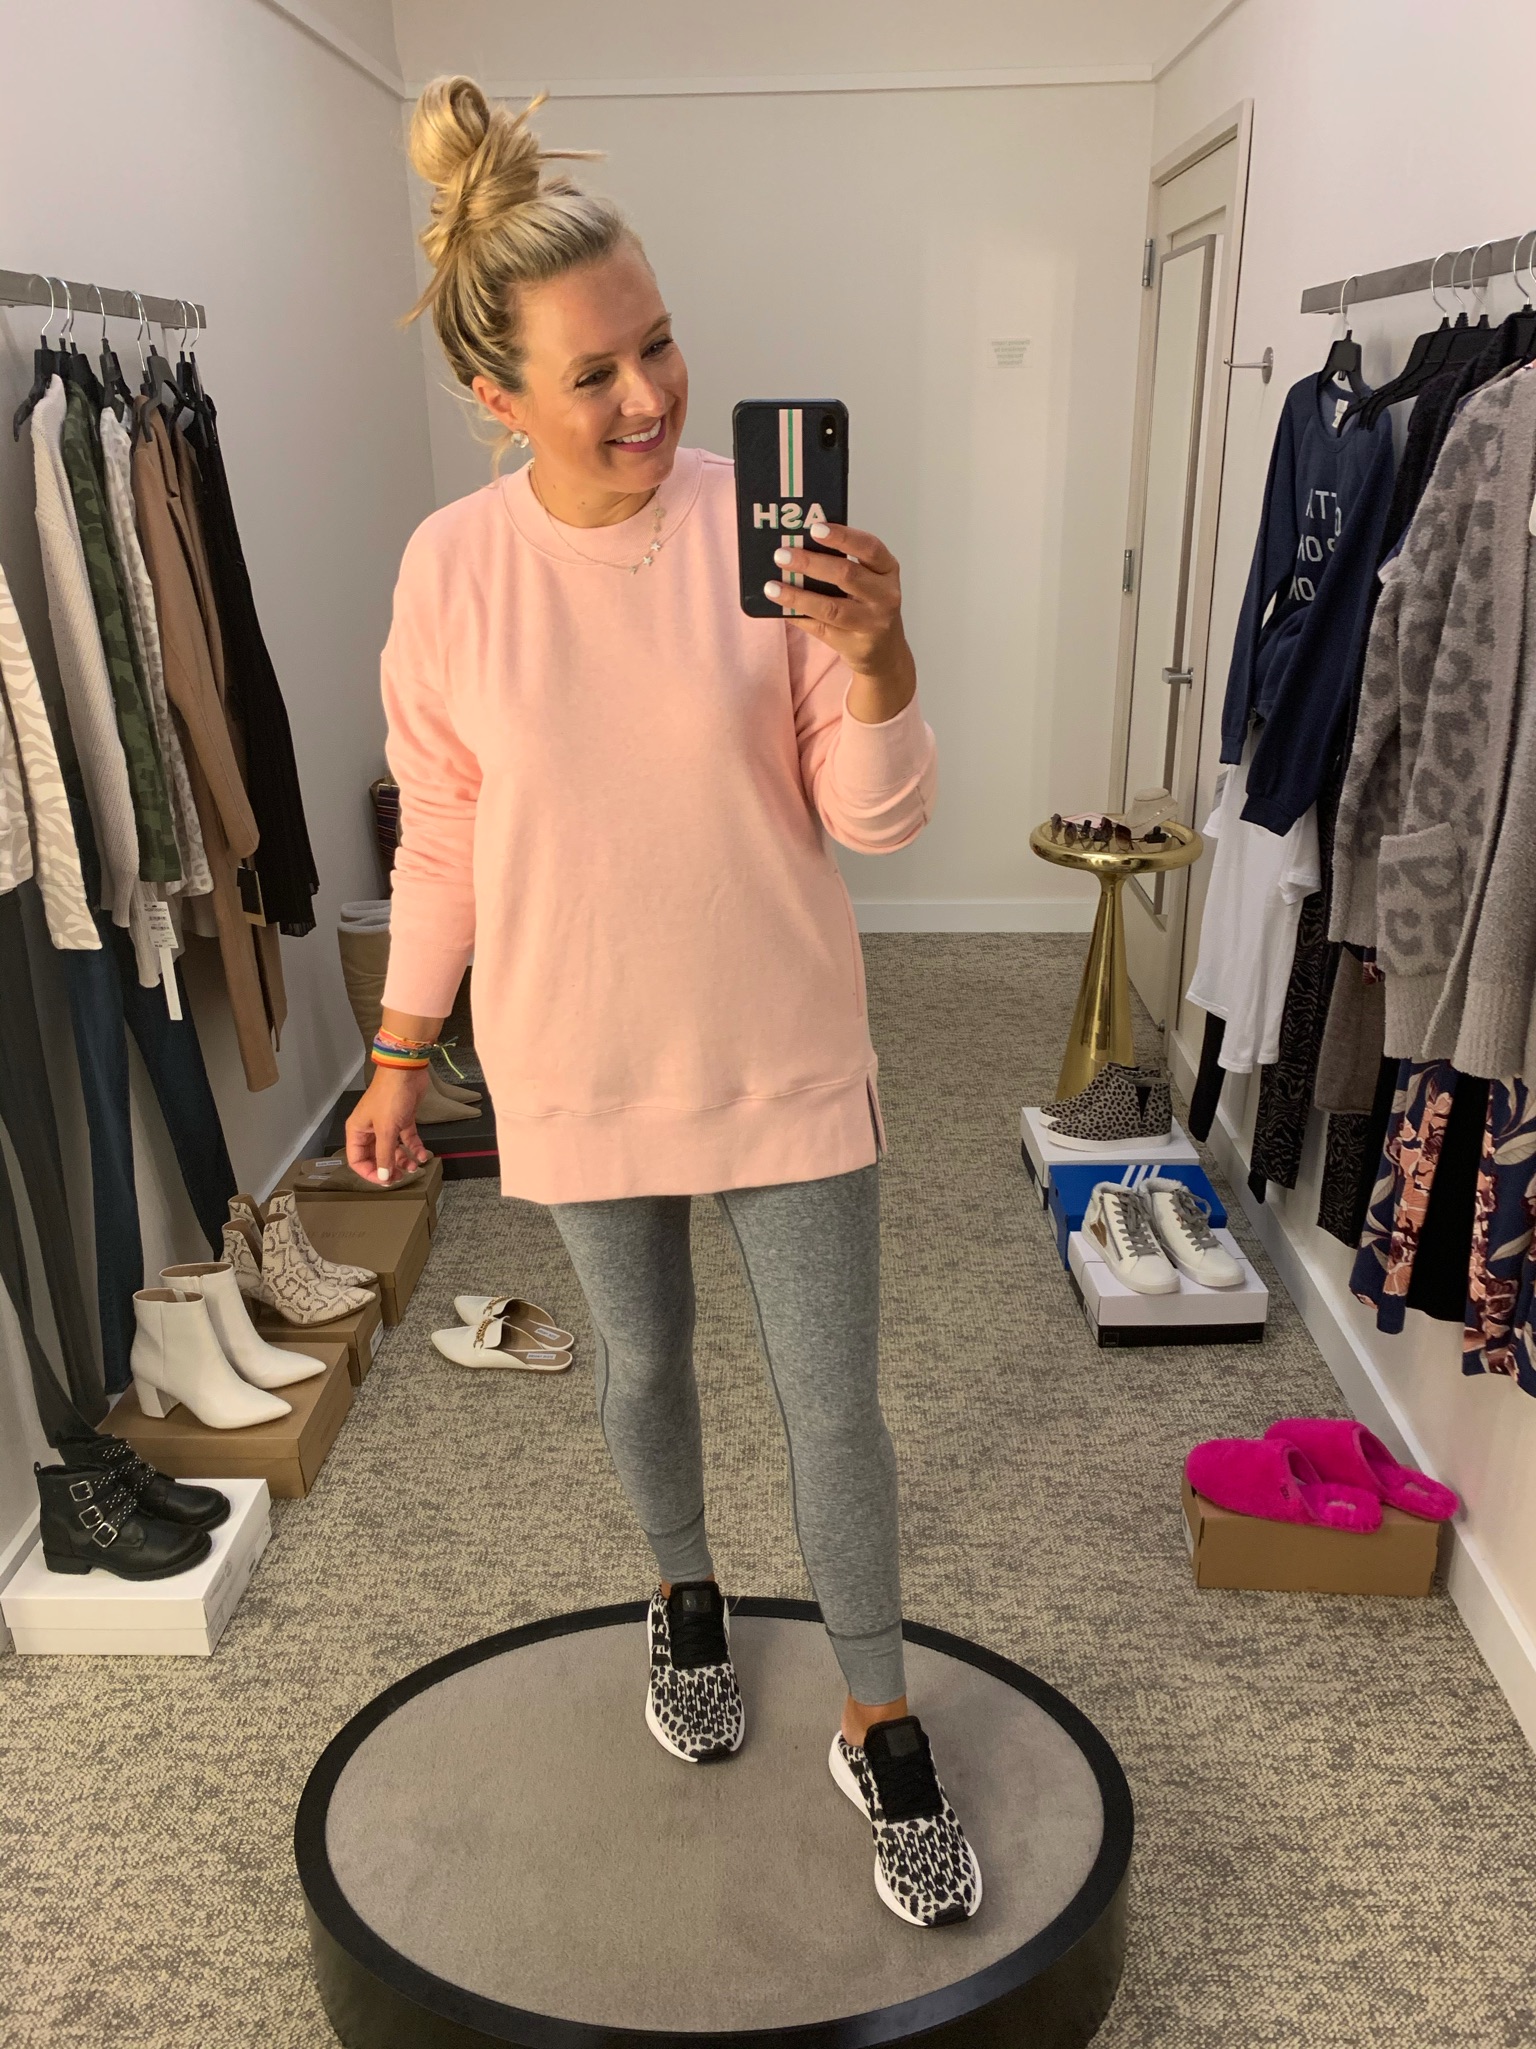 Nordstrom Anniversary Sale Fancy Fitting Room Finds